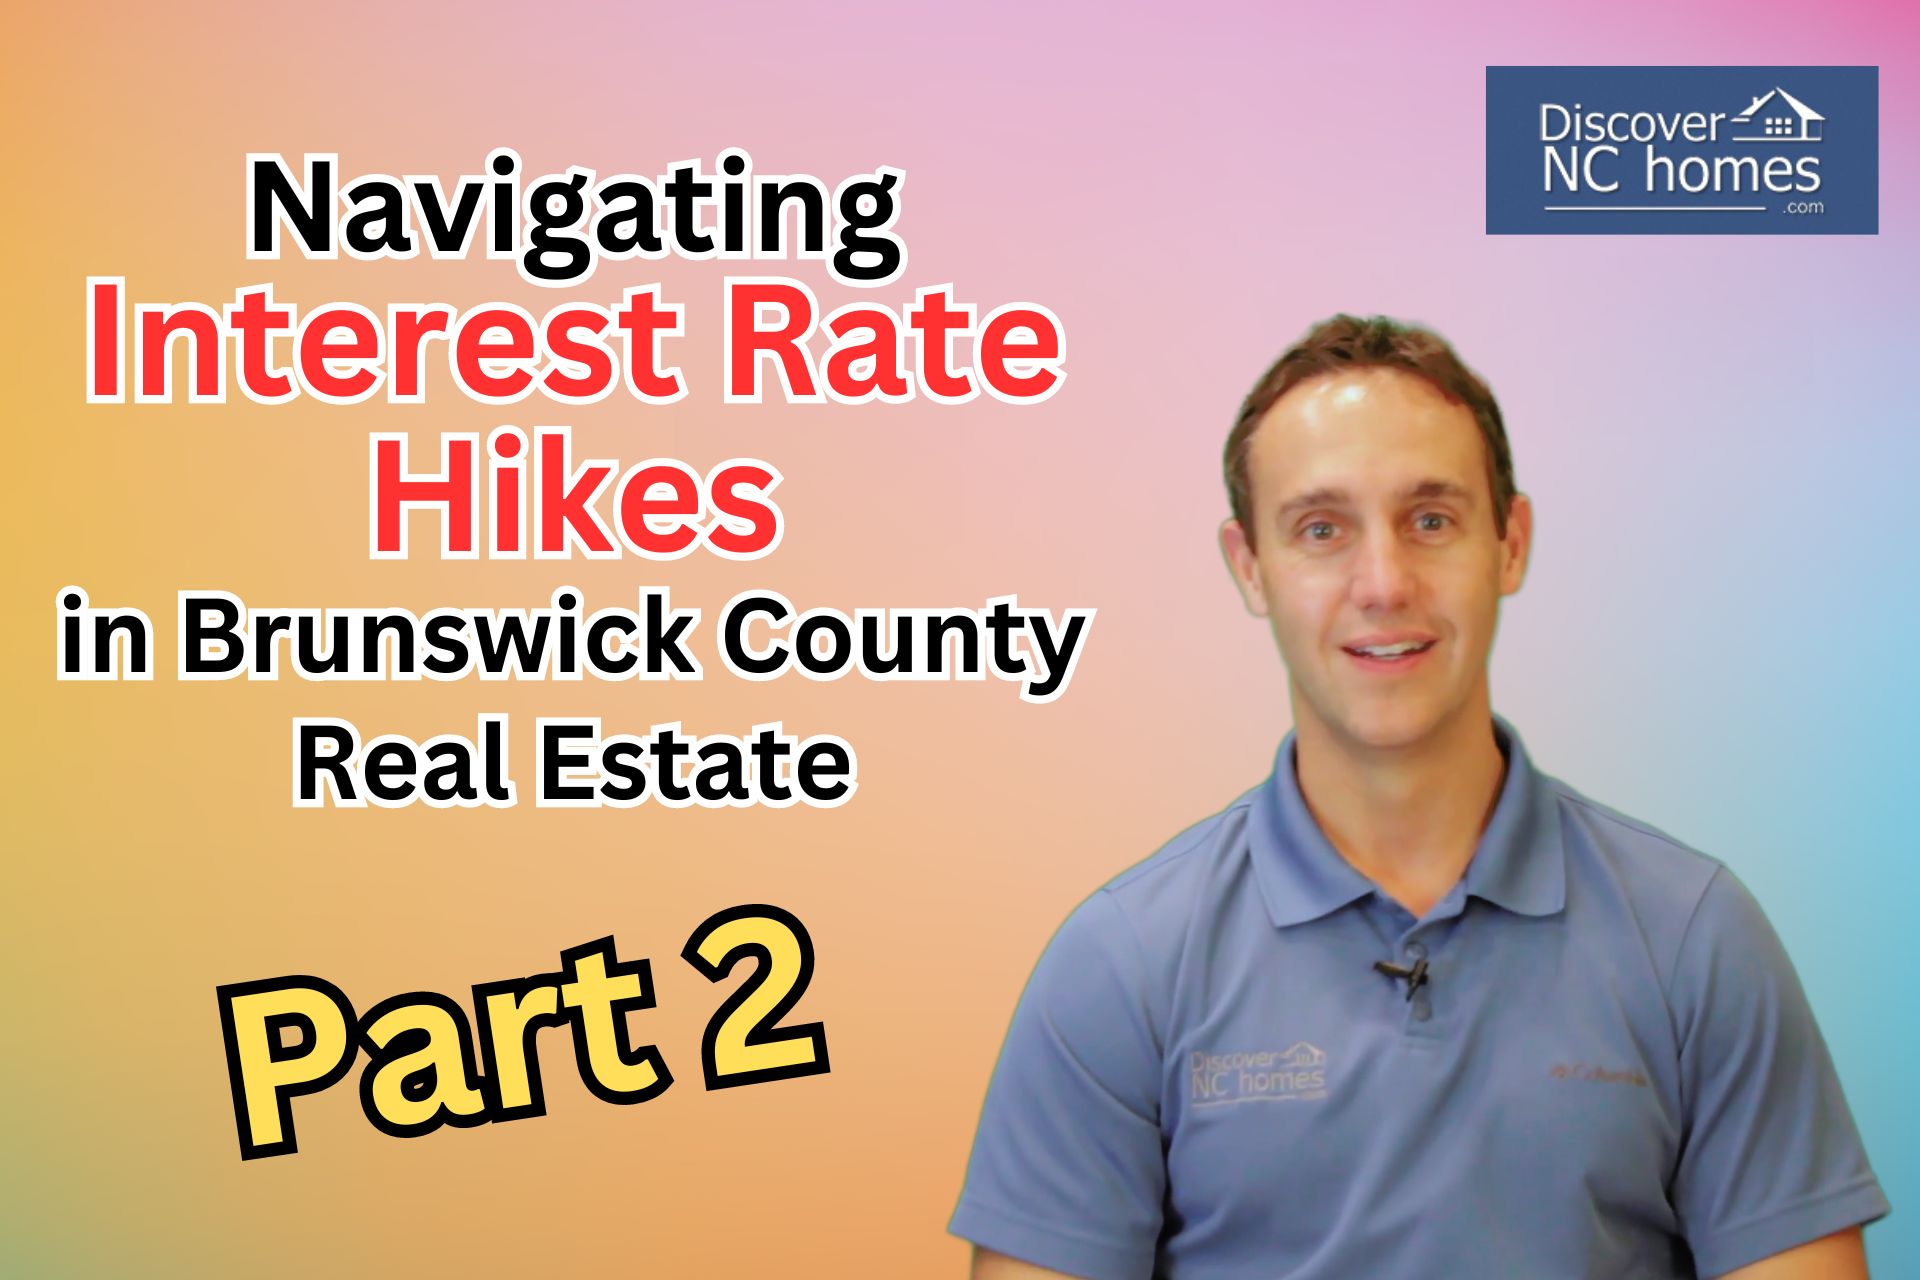 Navigating Interest Rate Hikes in Brunswick County - Part 2